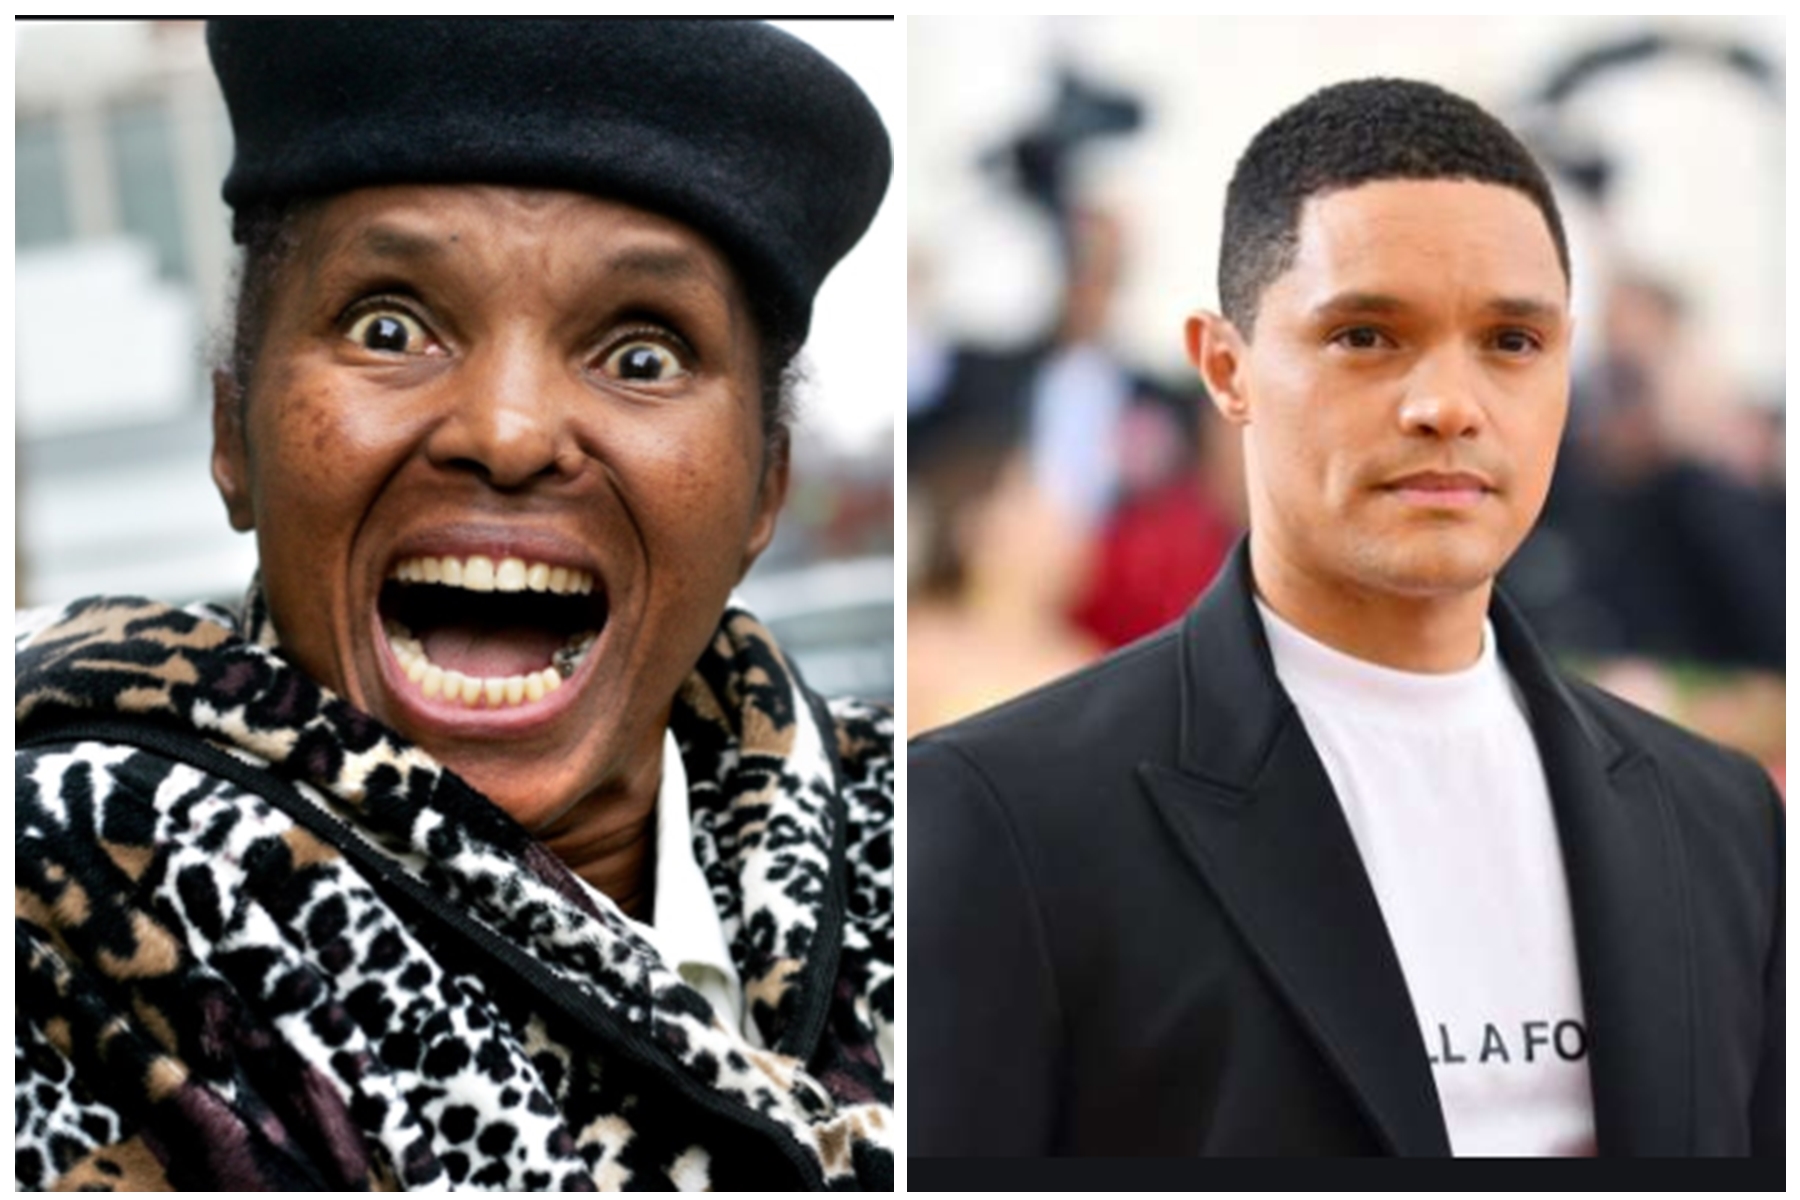 Under apartheid, trevor noah's mom taught him to face injustice with h...